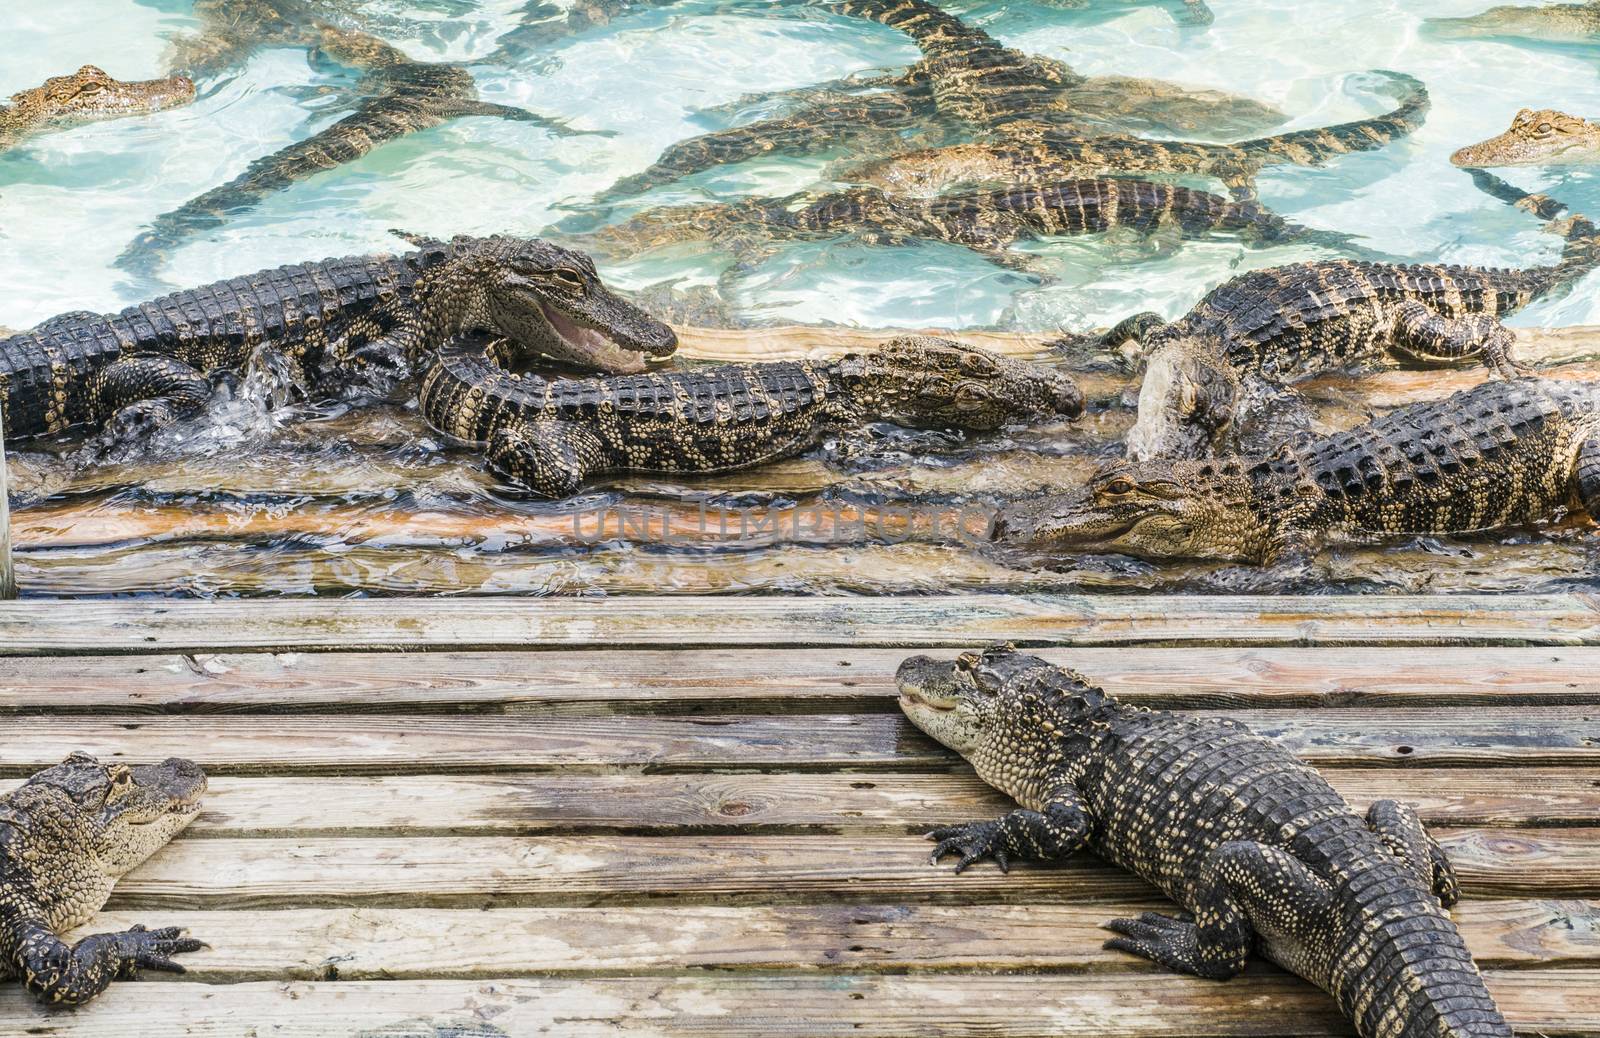 congregation of playful alligators in Florida tourism attraction by Njean